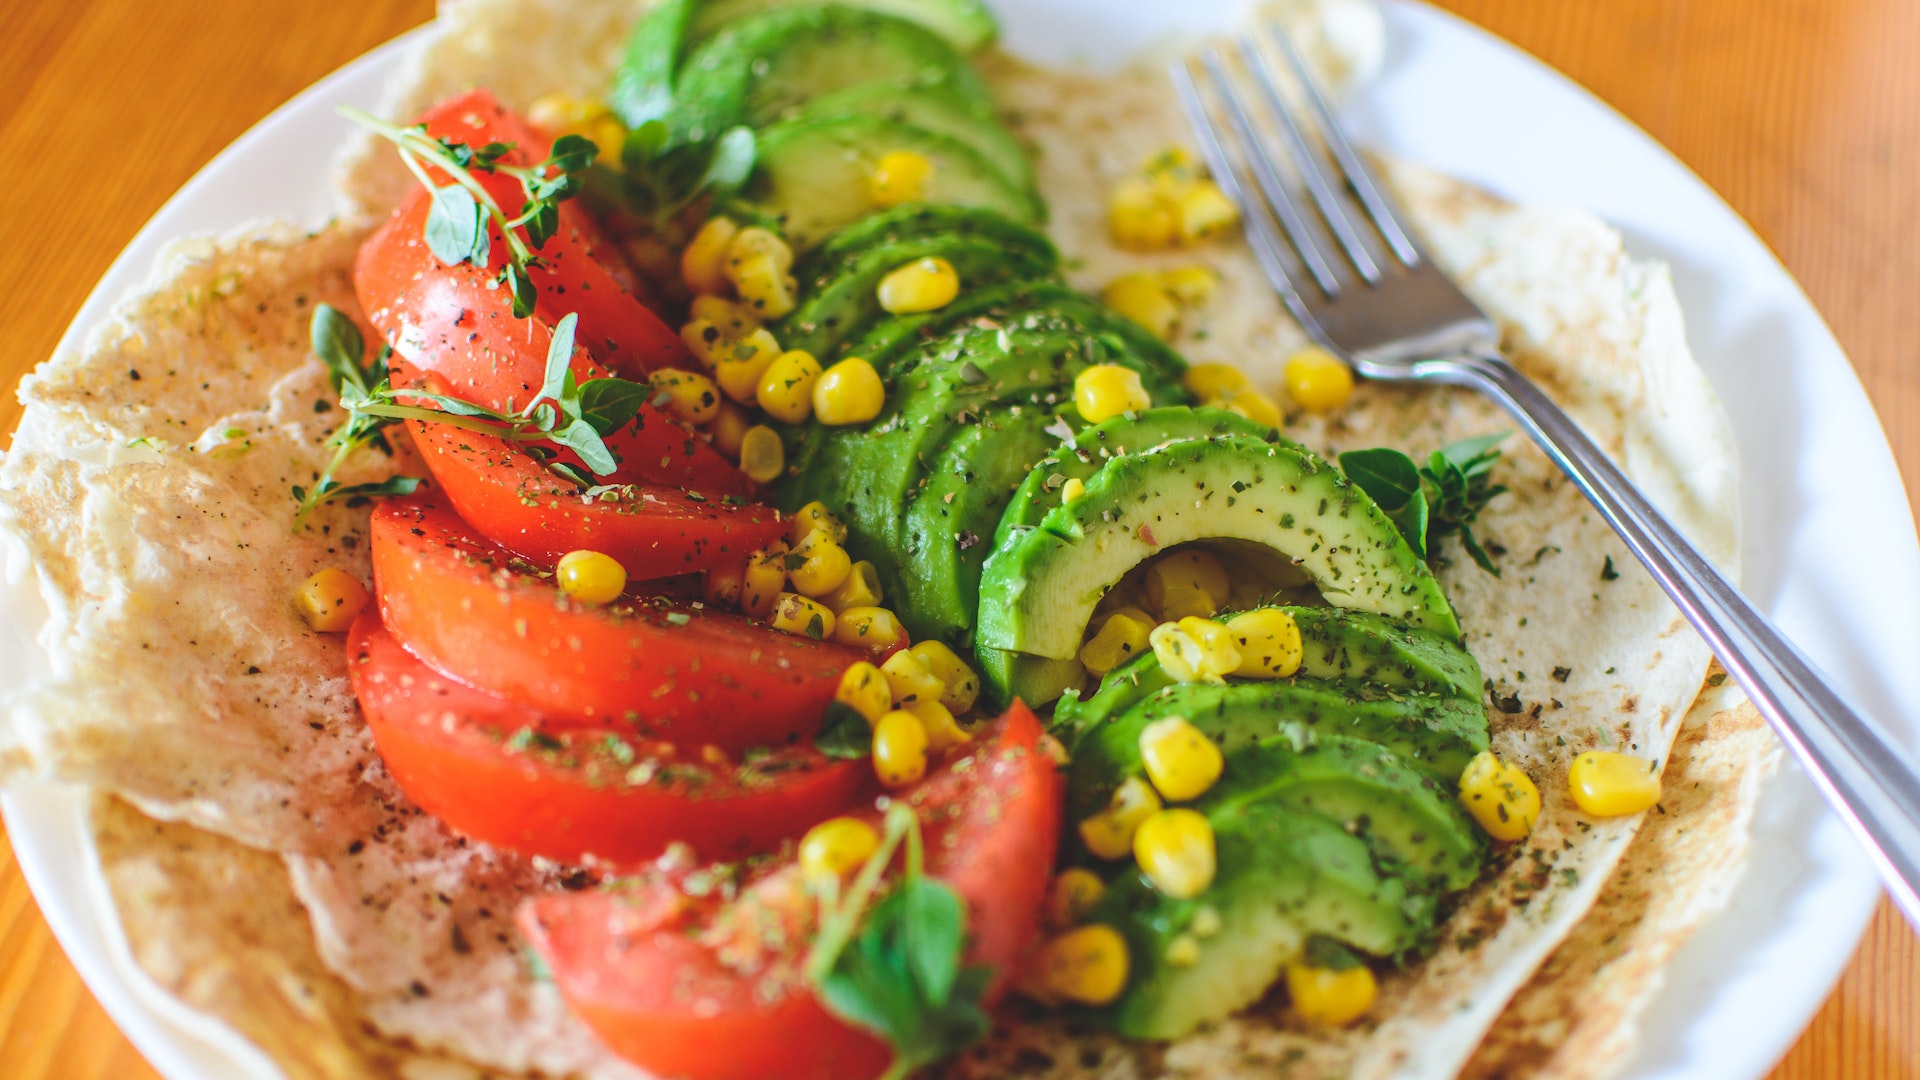 Slices of seasoned tomato and avocado sit on a wrap